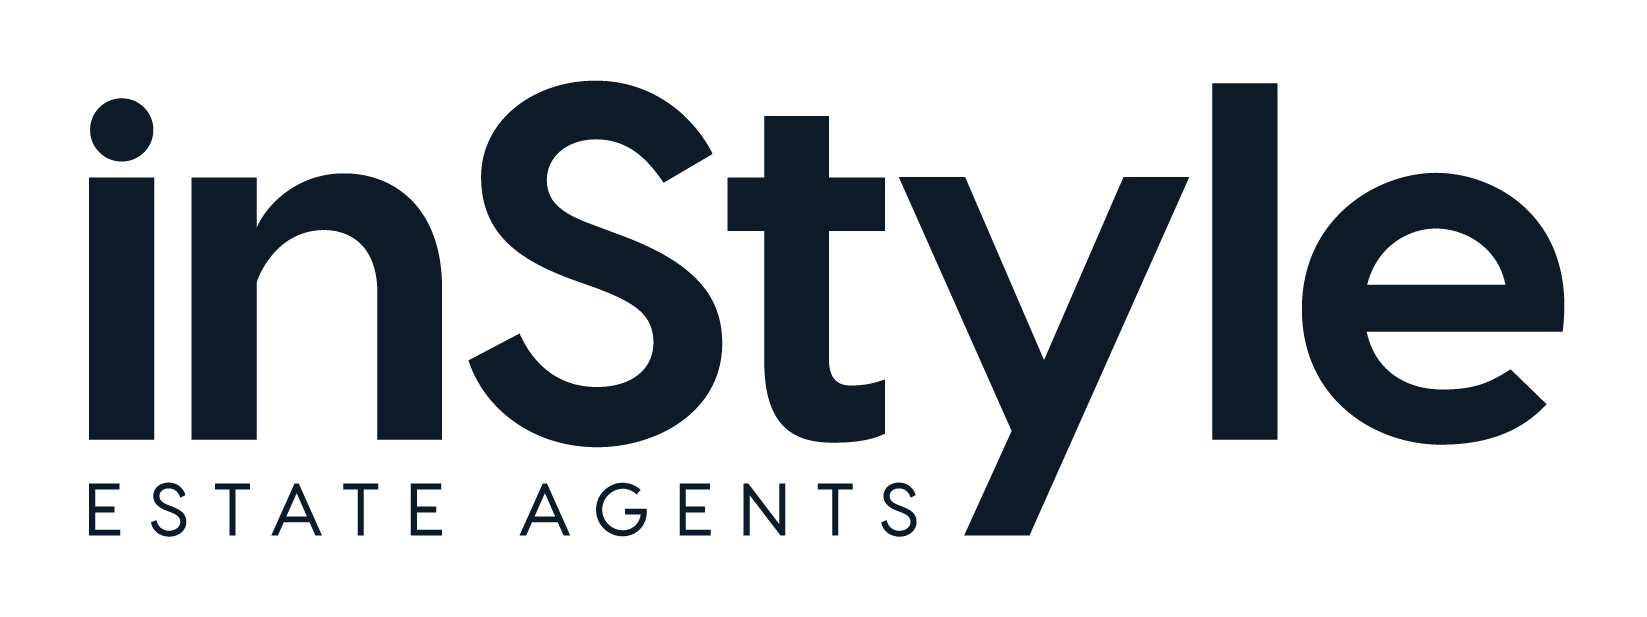 Instyle Estate Agents Canberra